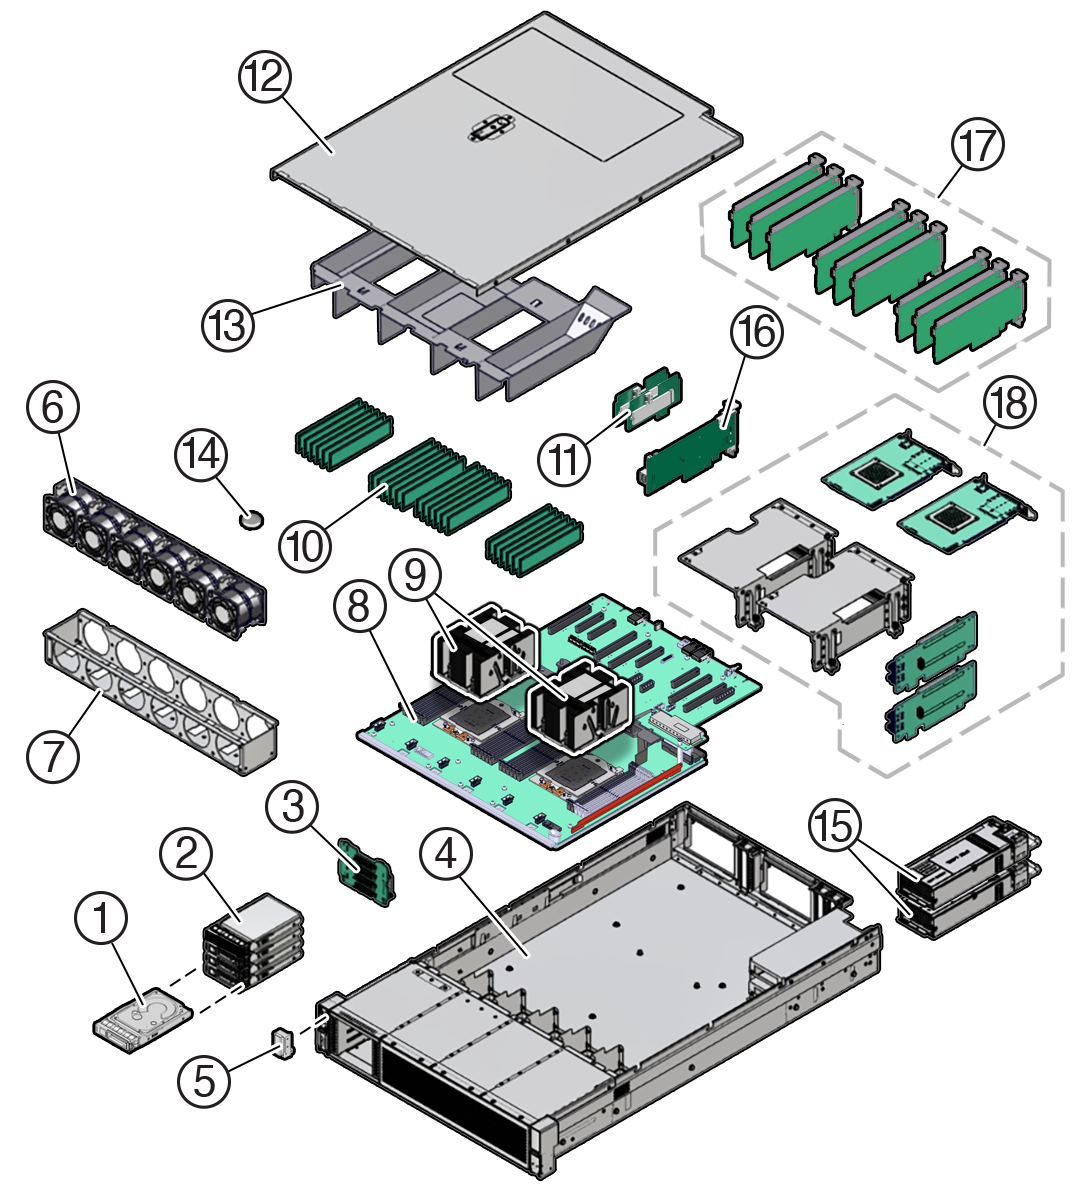 Figure showing exploded view of server with 4-Drive backplane system components.